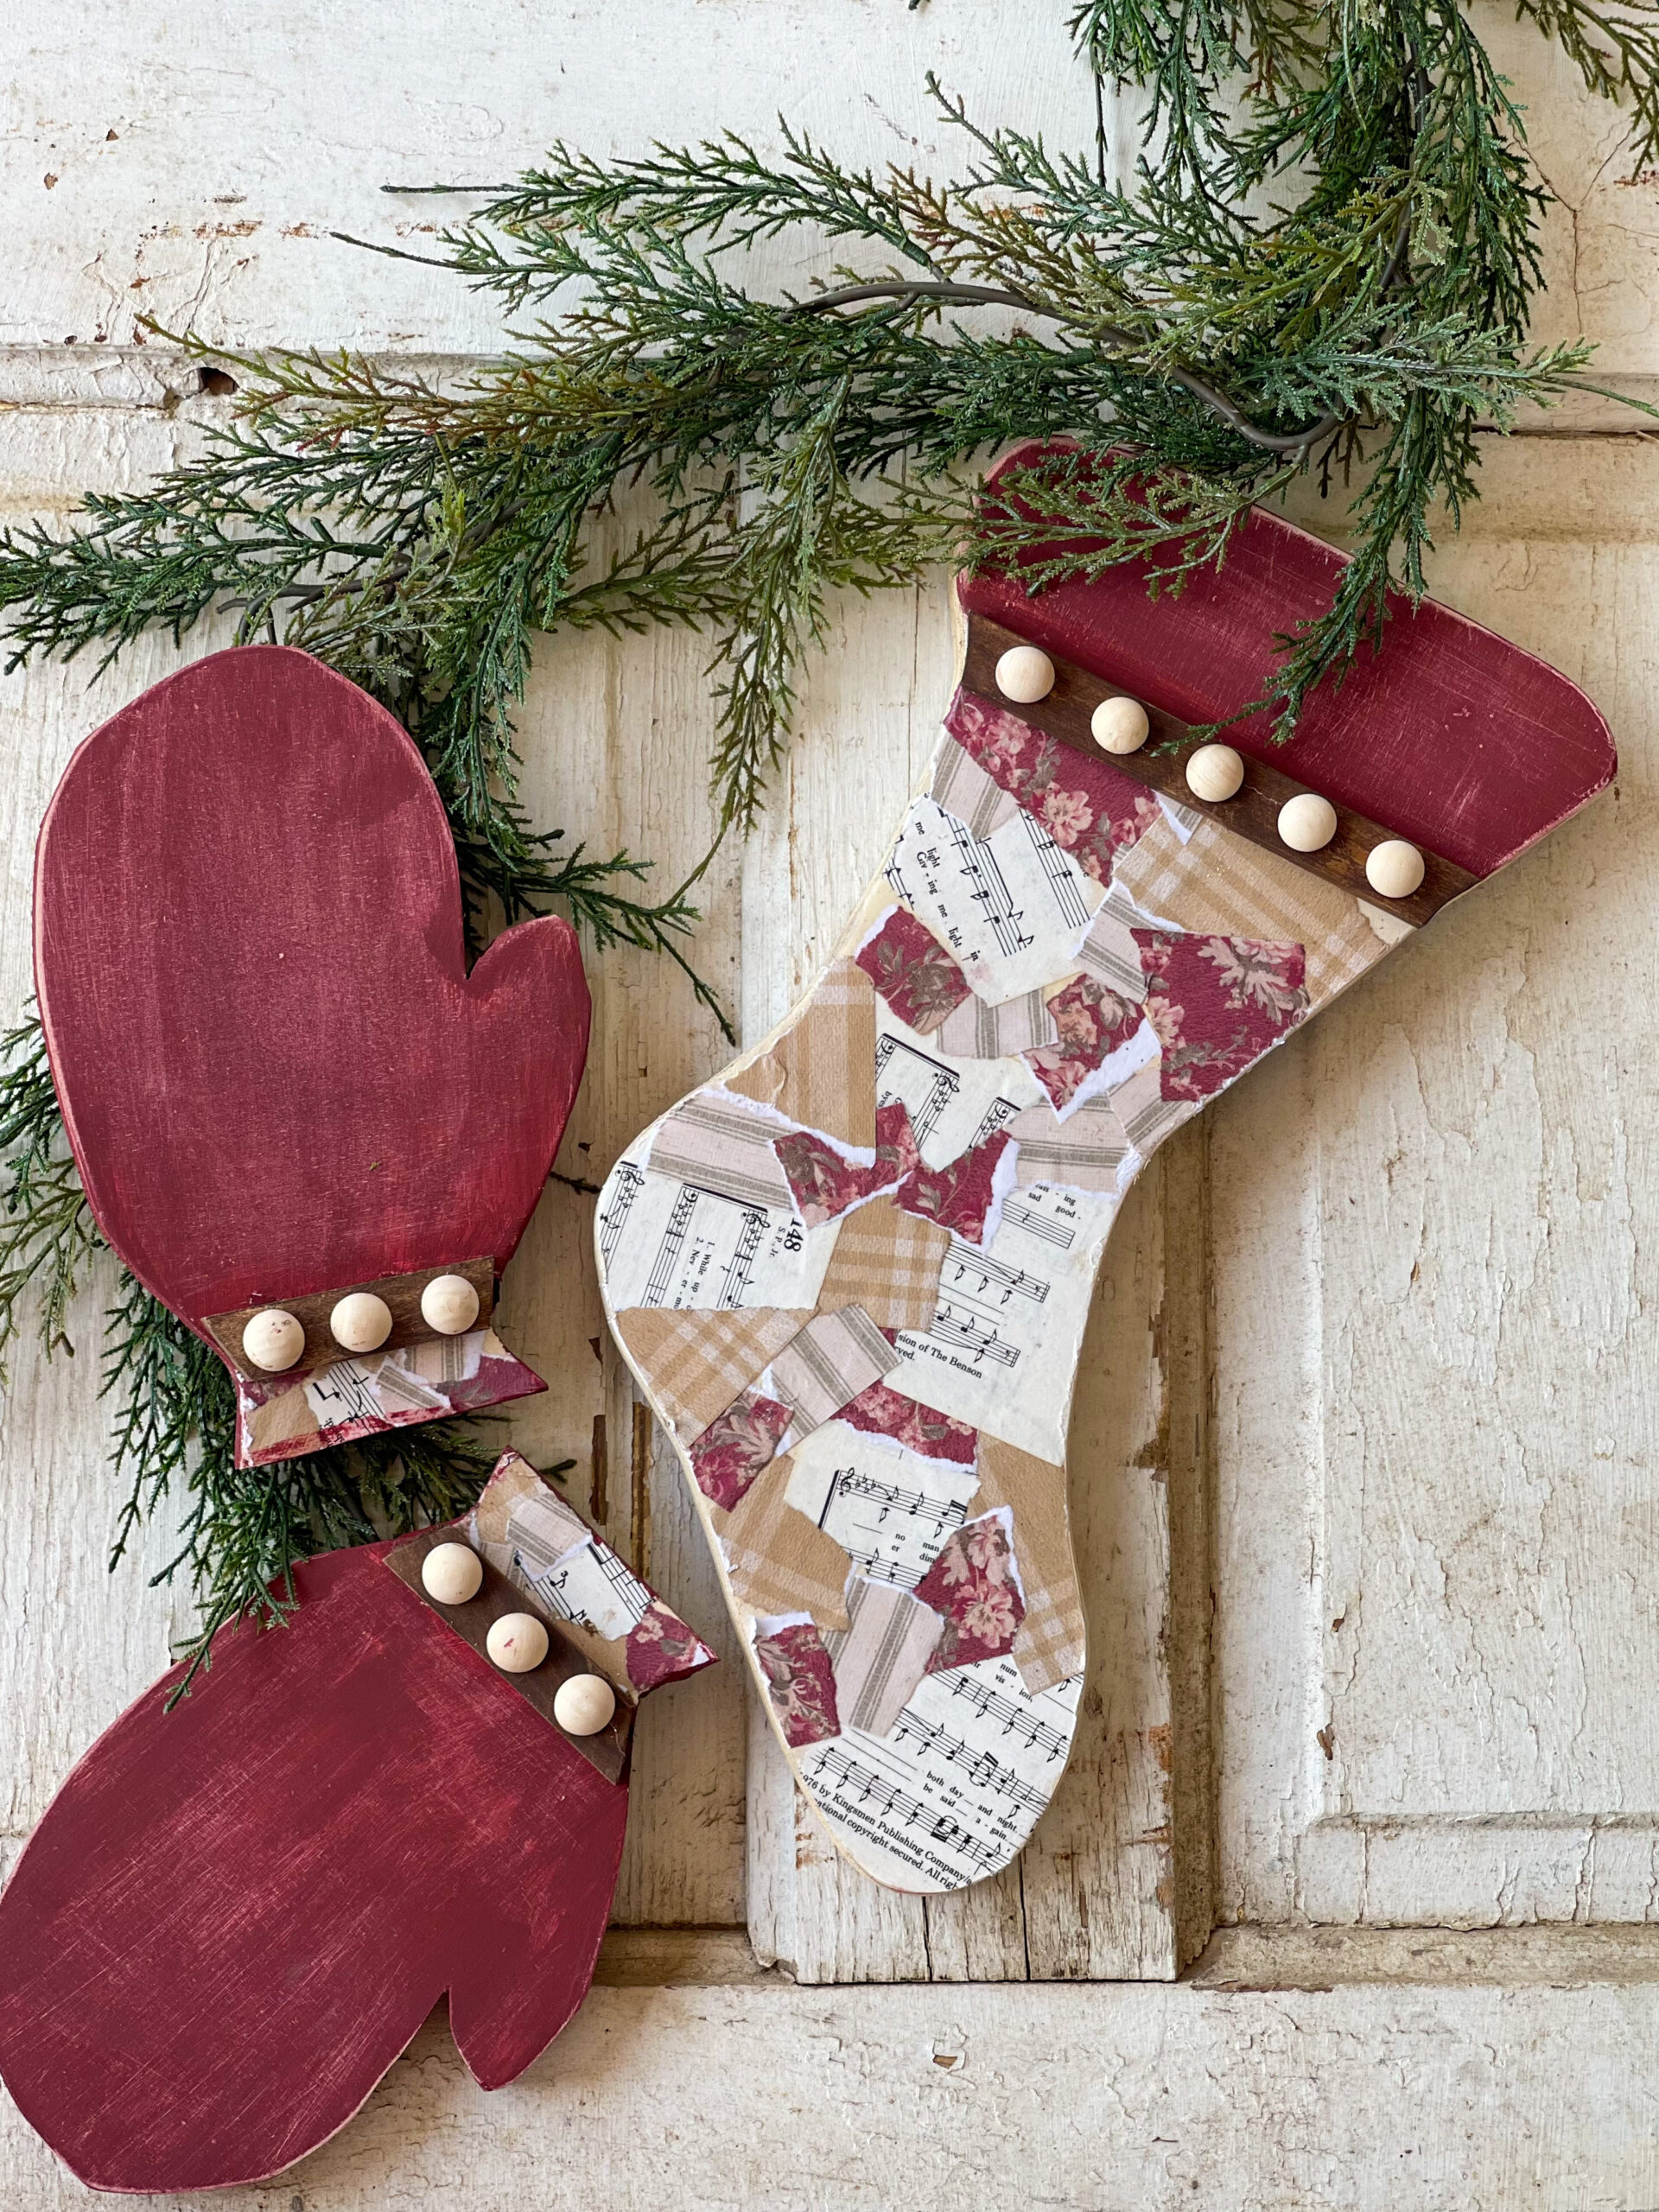 scrap wood mittens and stocking for diy christmas decor